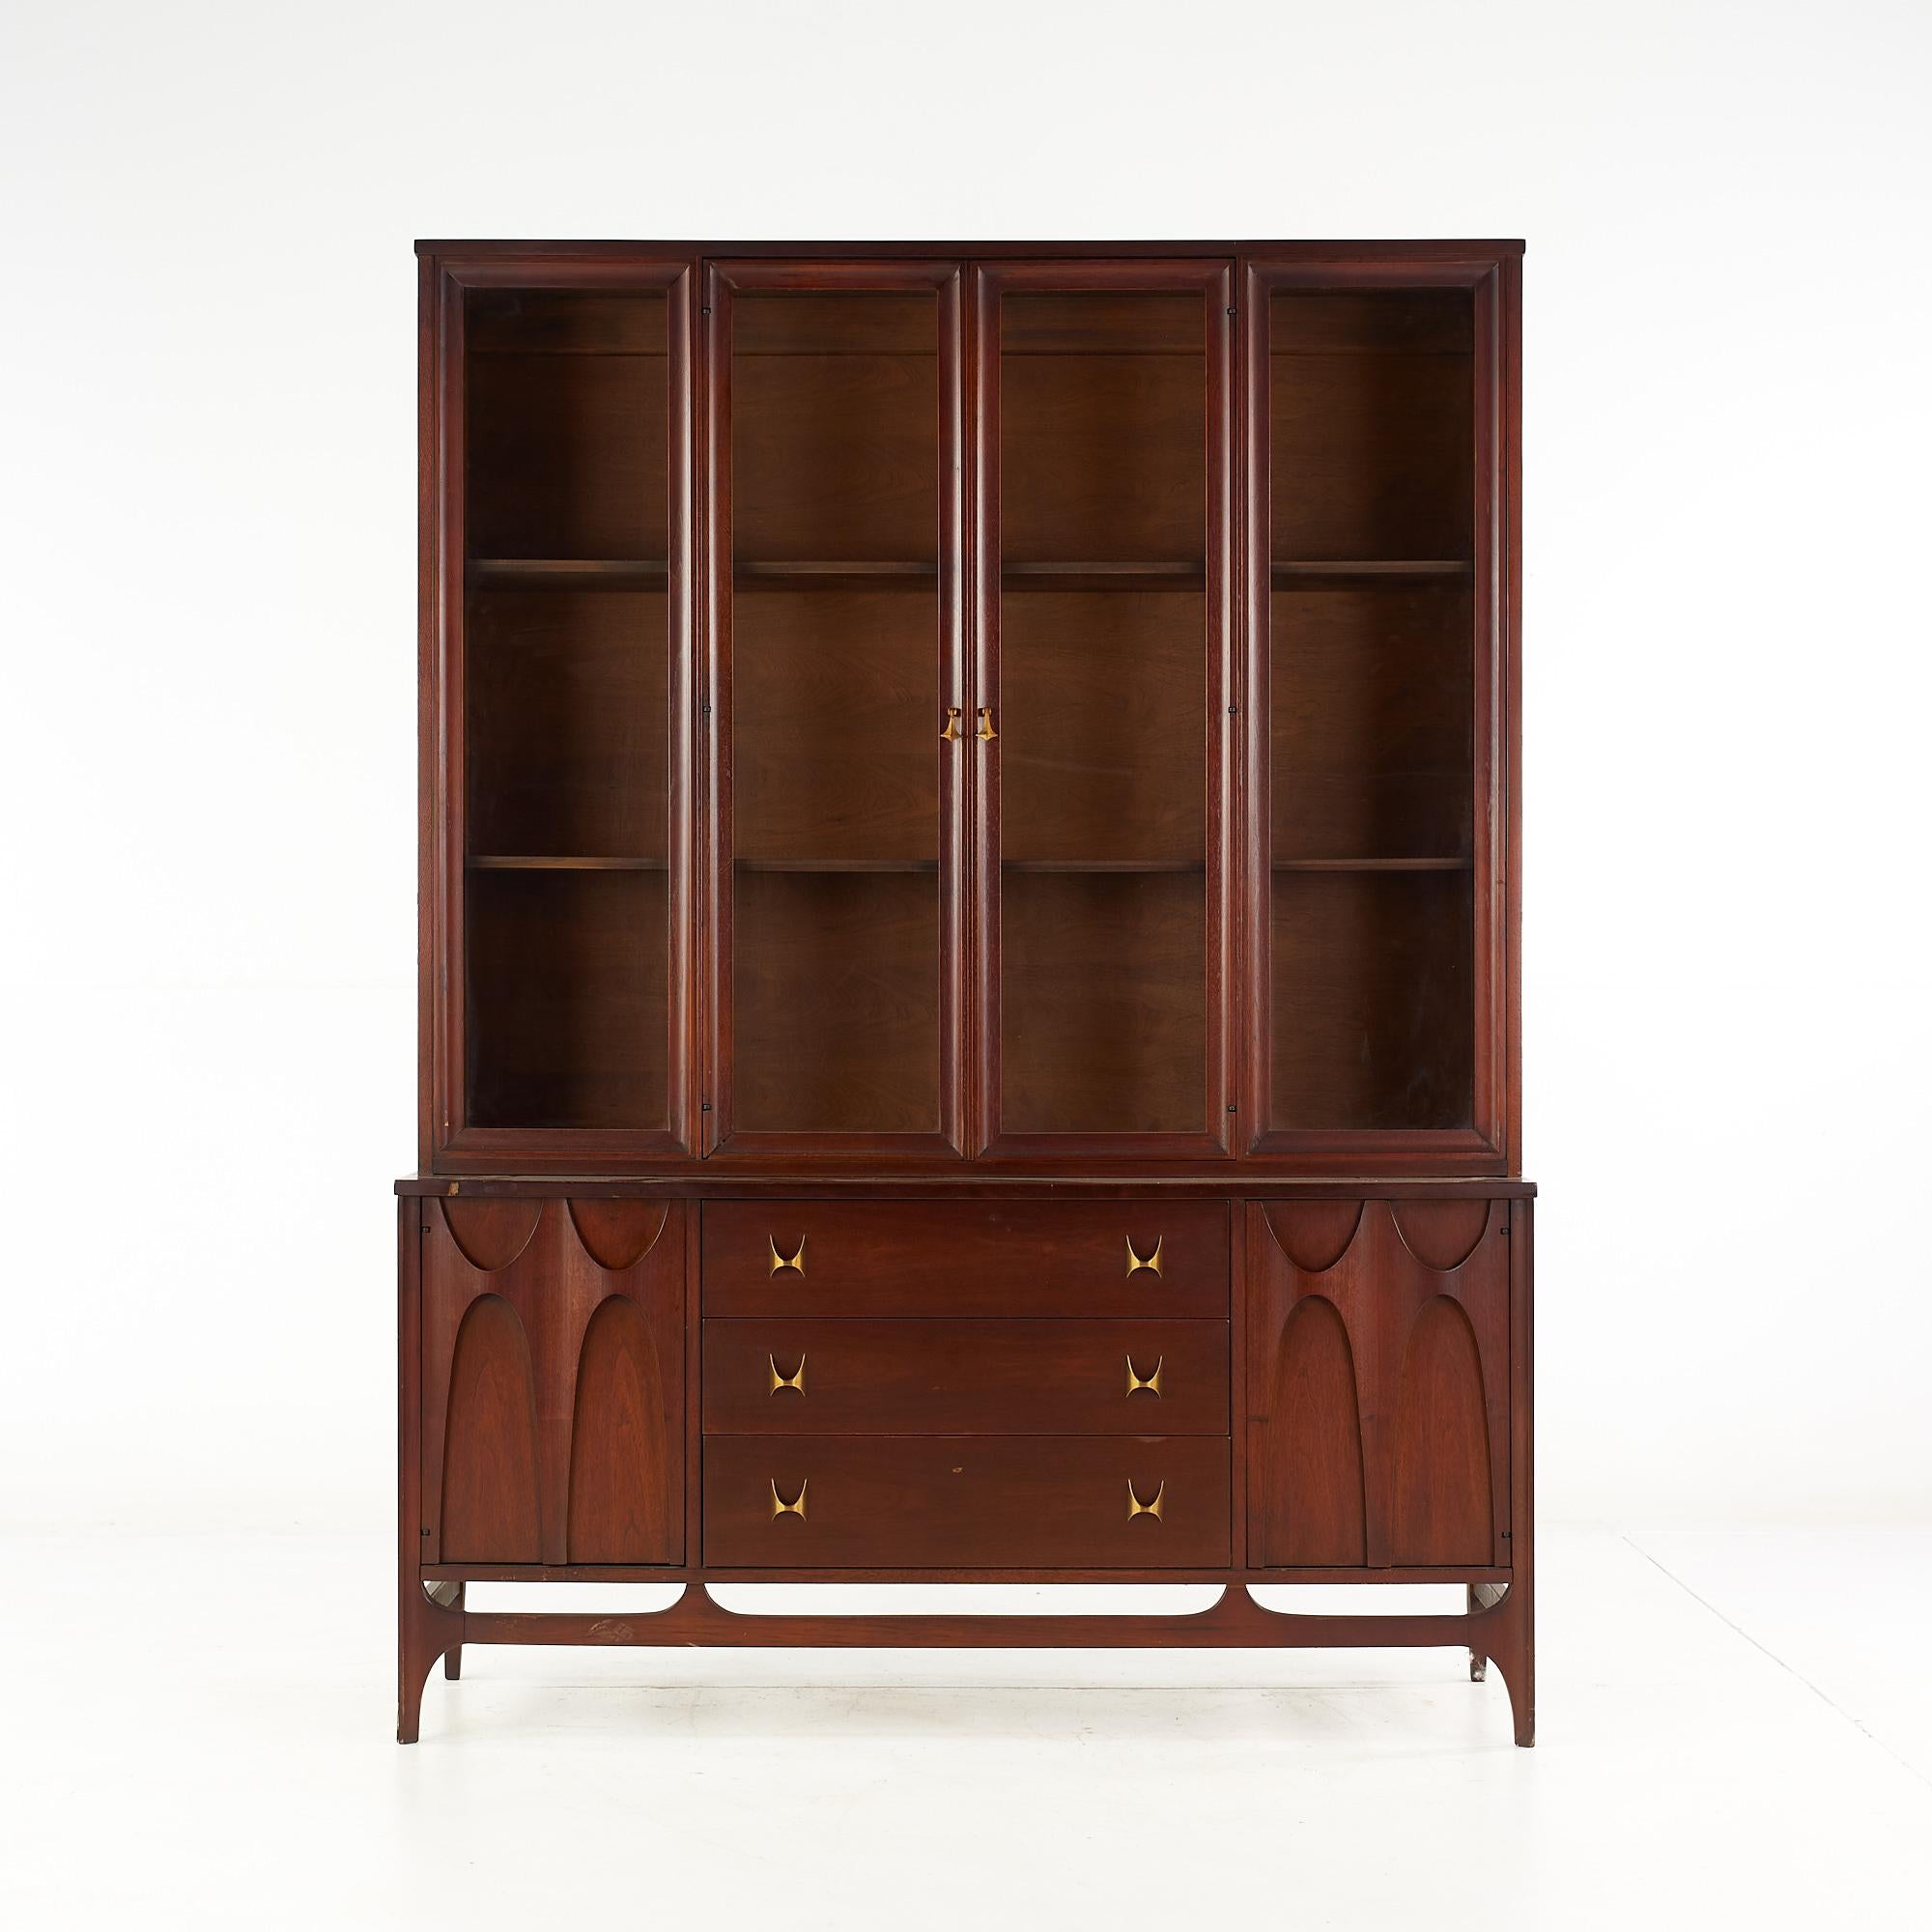 Broyhill Brasilia Mid Century Walnut China cabinet buffet and hutch

The buffet measures: 56 wide x 17 deep x 28 inches high
The hutch measures: 55 wide x 13 deep x 47 inches high
The combined height of the buffet and hutch is 75 inches

All